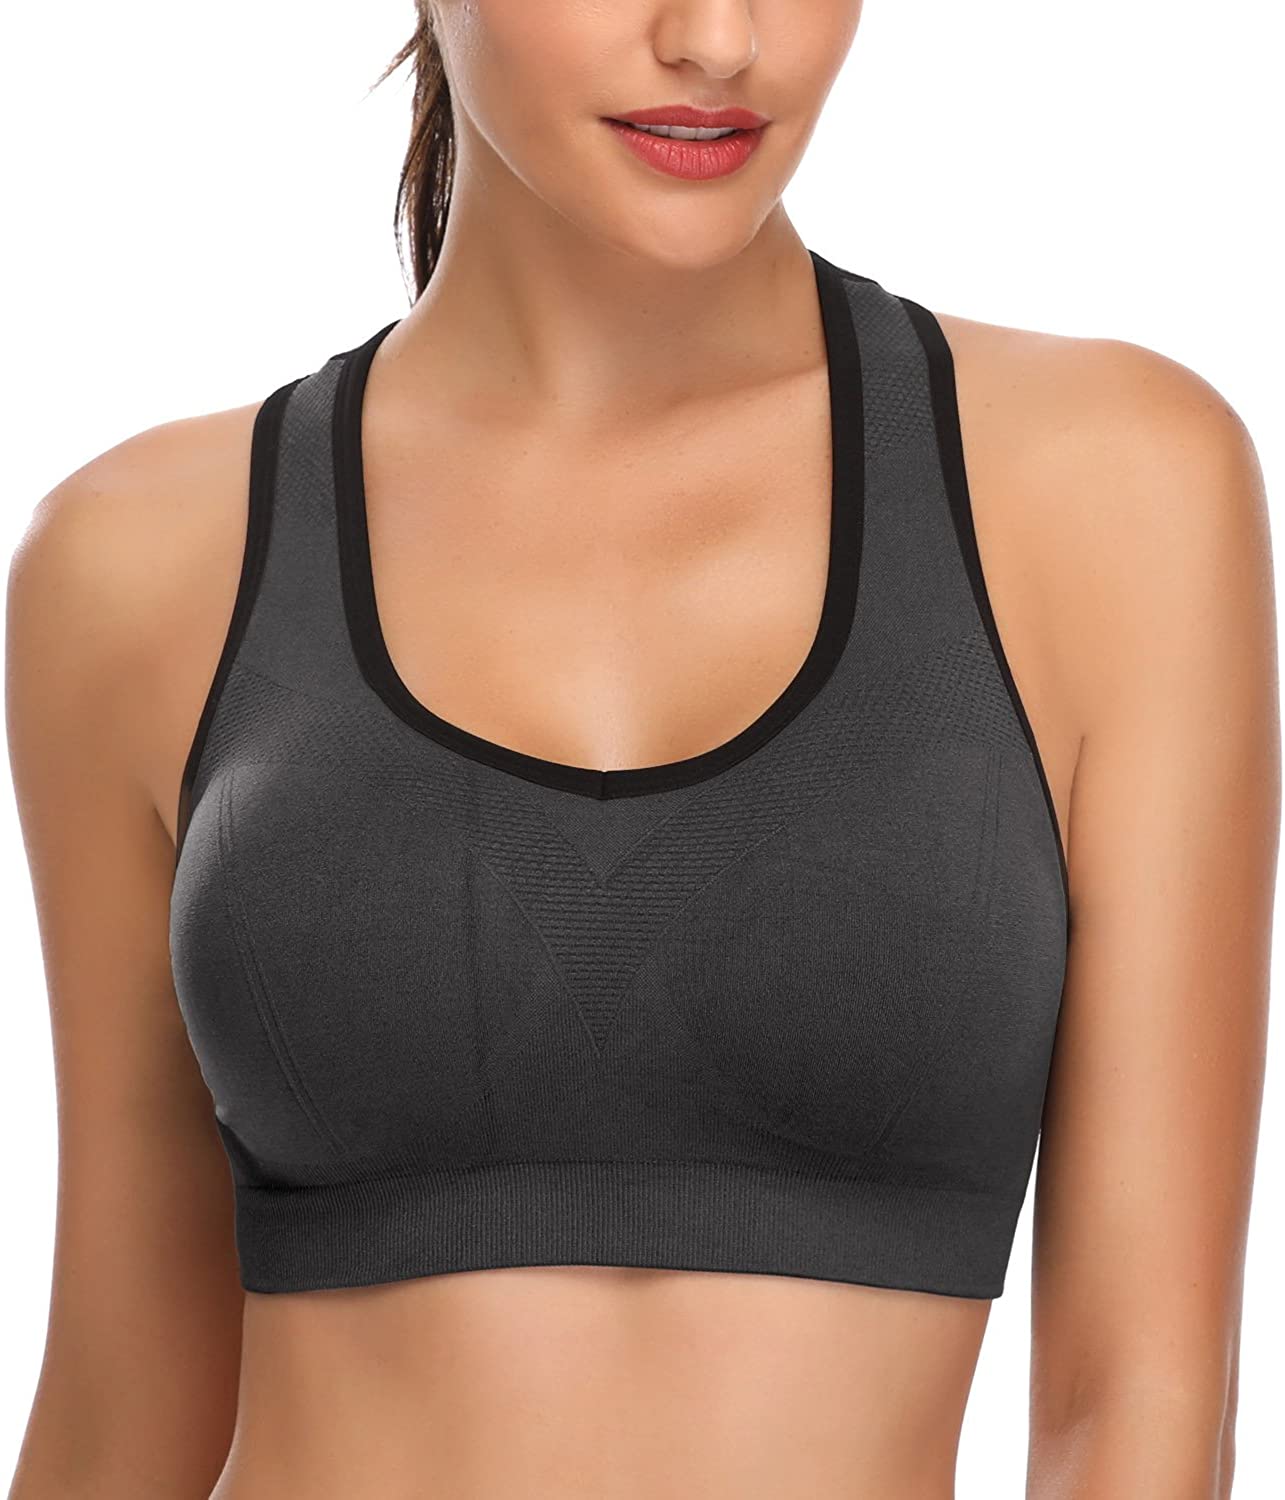 Padded Strappy Sports Bras for Women - Activewear Tops for Yoga Running  Fitness | eBay